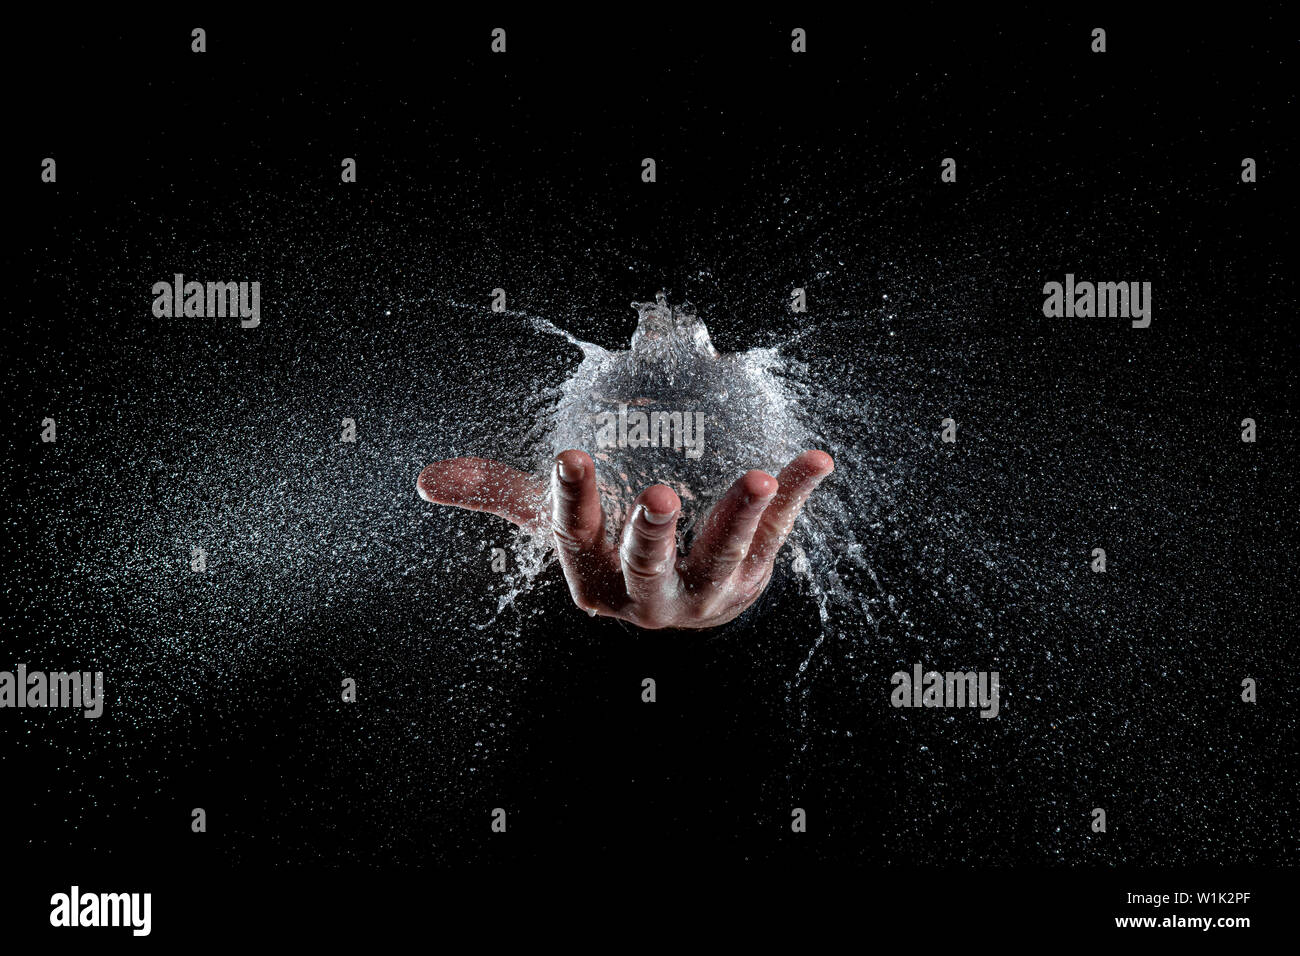 explosion of a balloon full of water held on a hand, black background studio shot. Hi speed photography Stock Photo